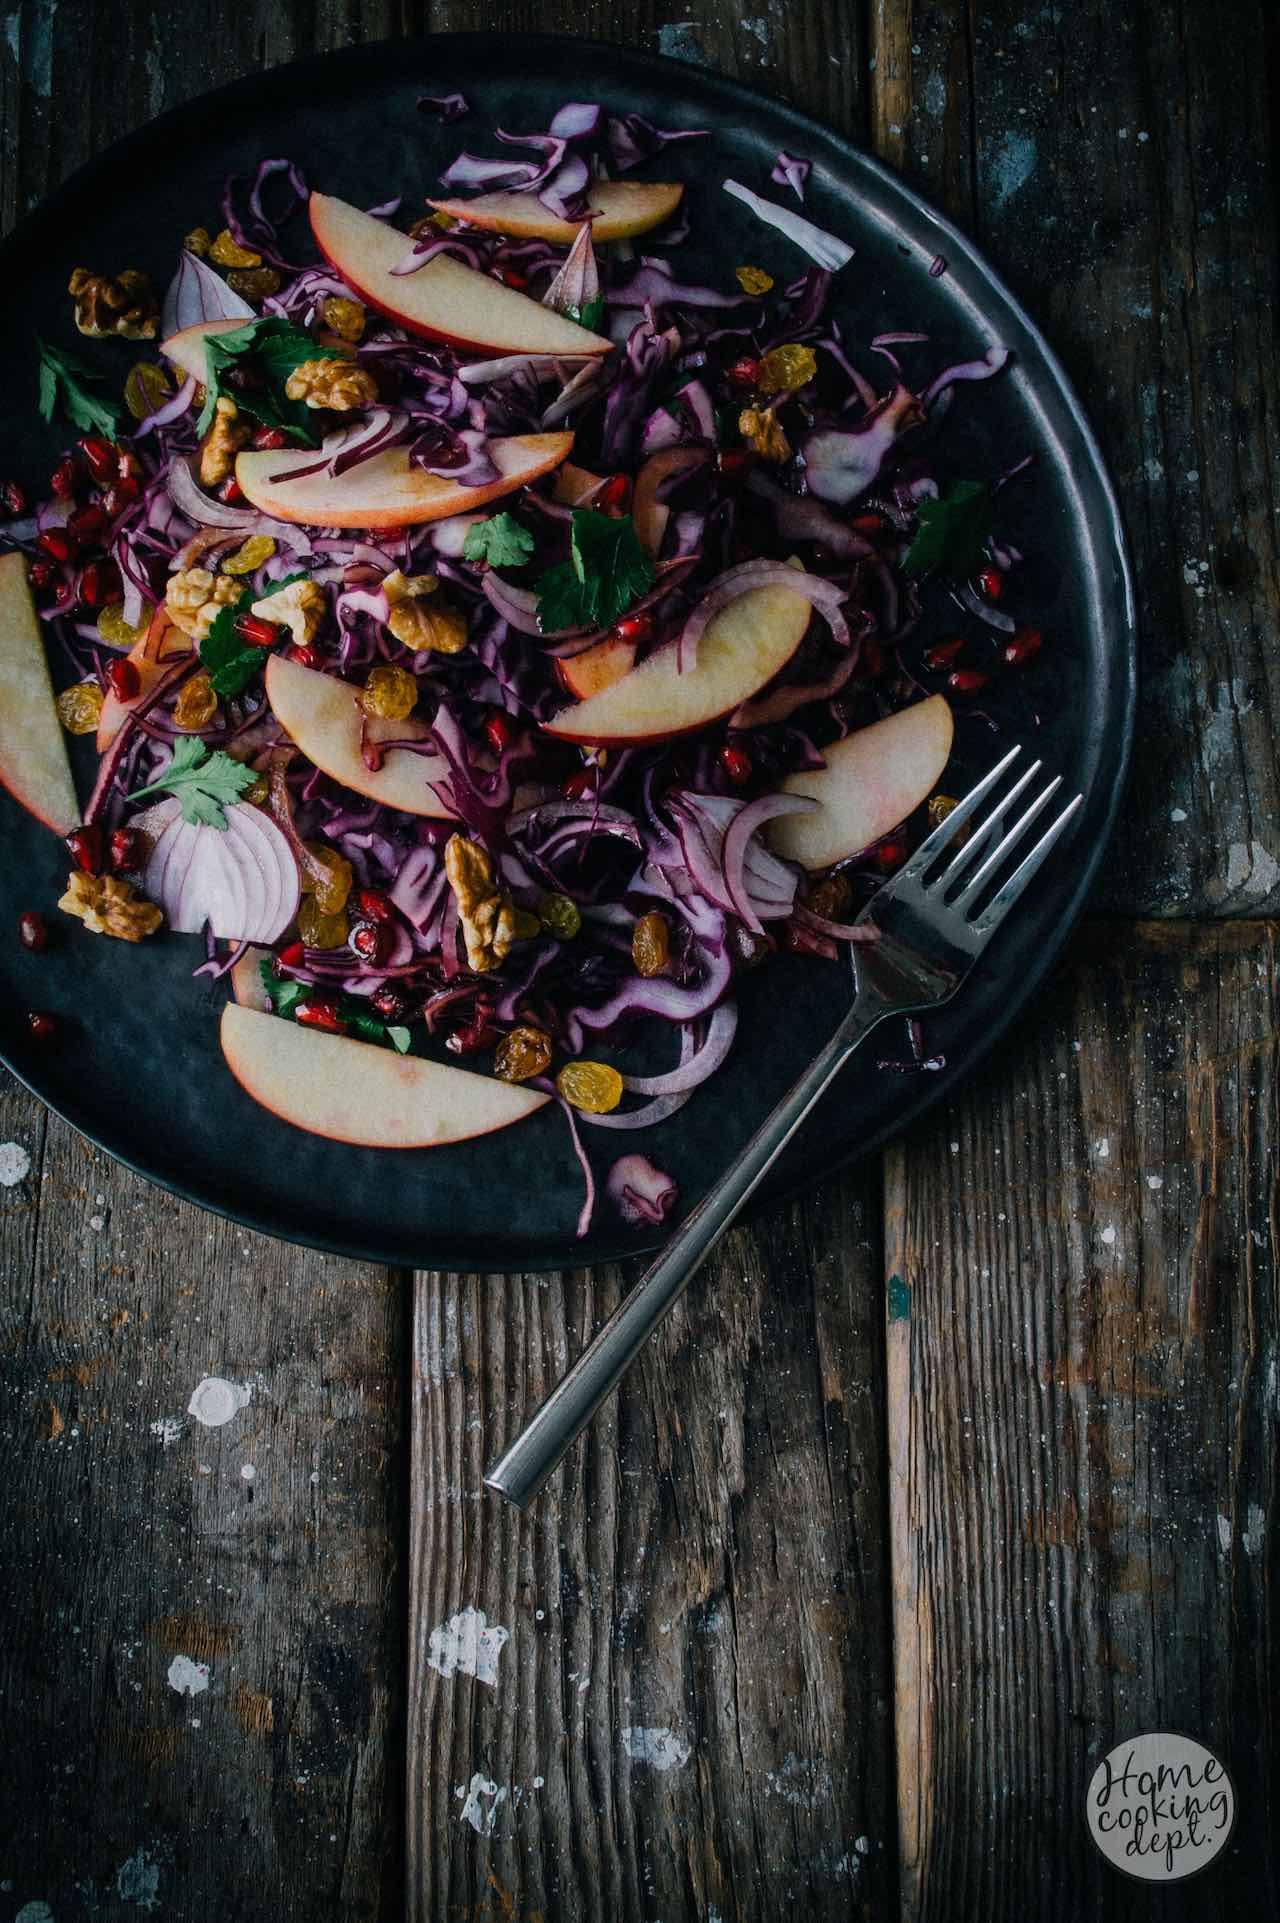 rode kool salade / red cabbage salad / Photography Homecooking dept.